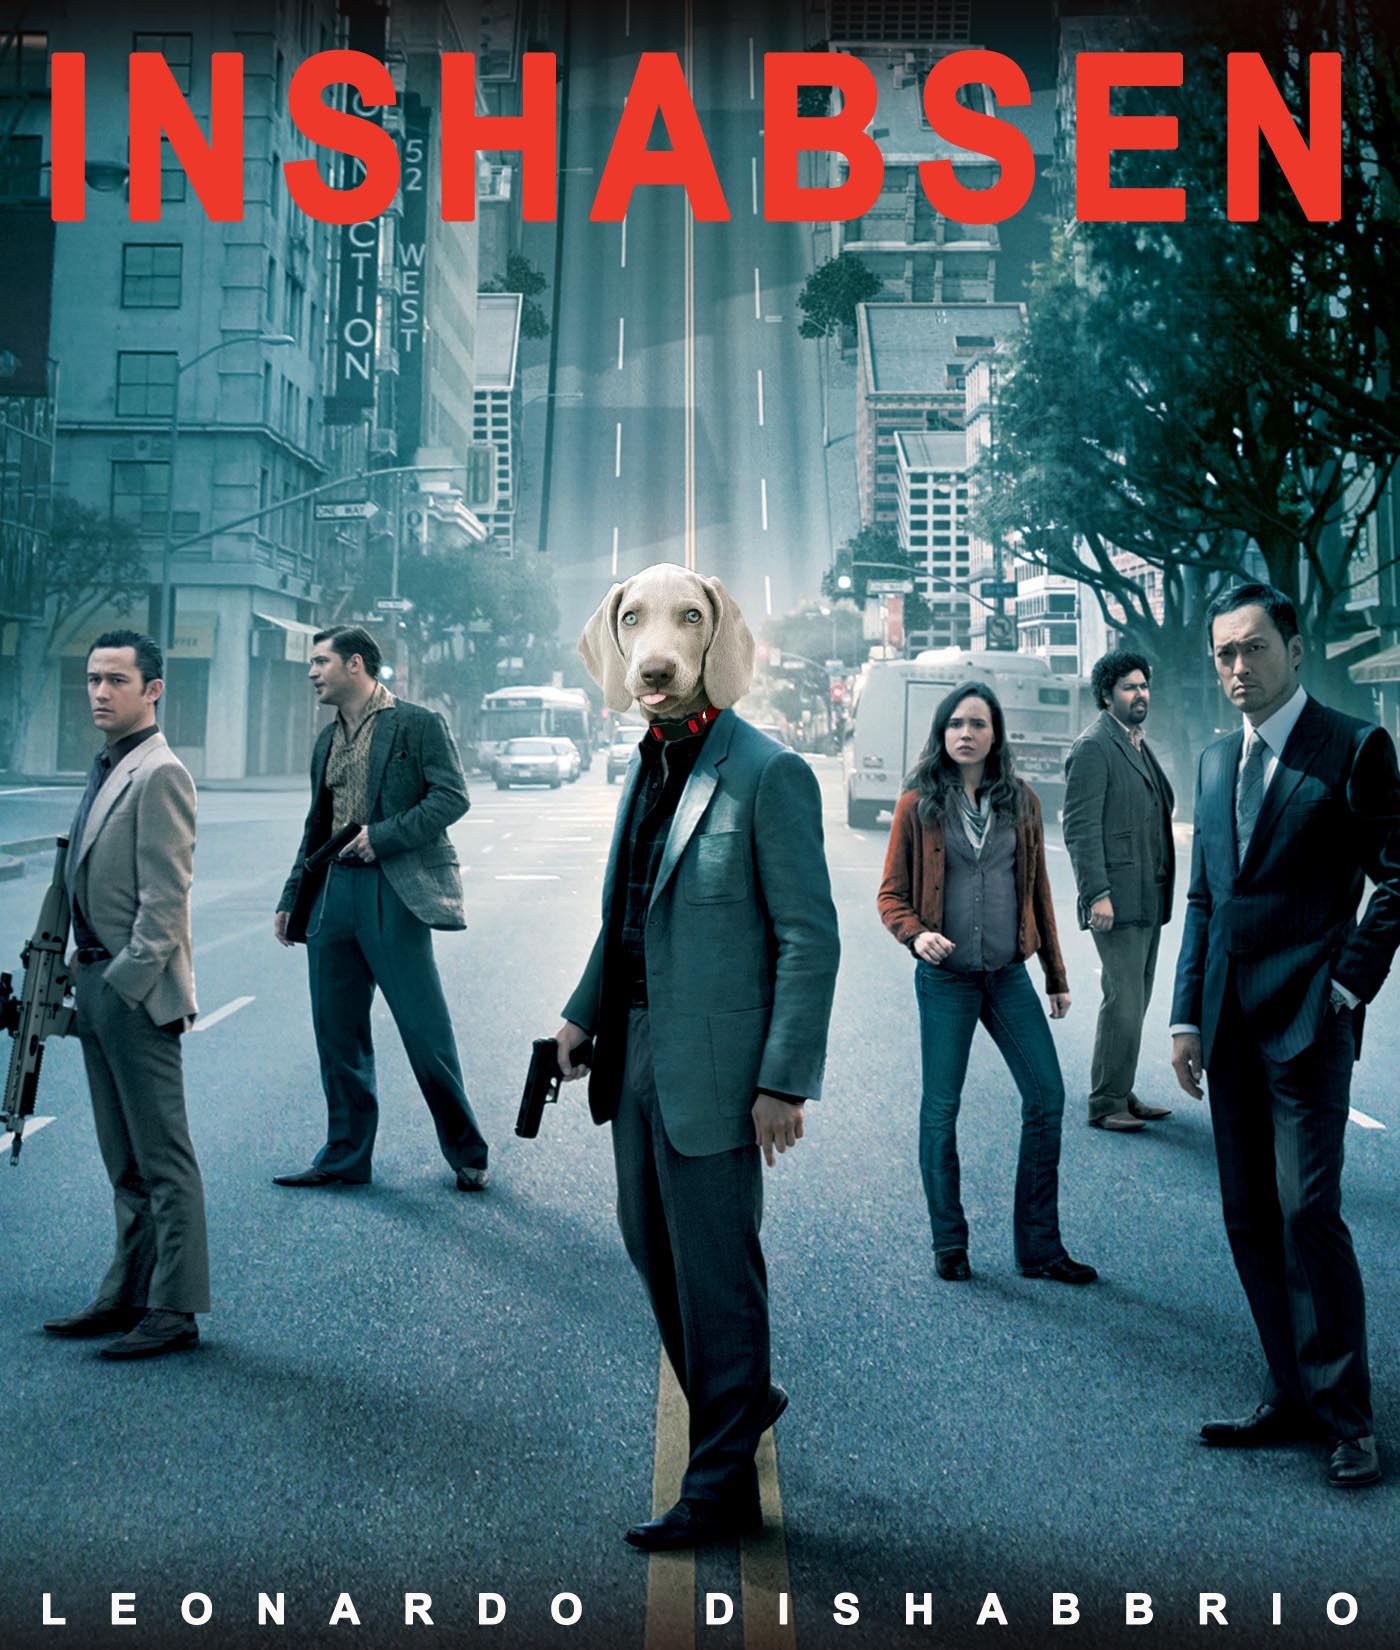 Shabby's head on Leonardo DiCaprio's body on the movie poster for Inception